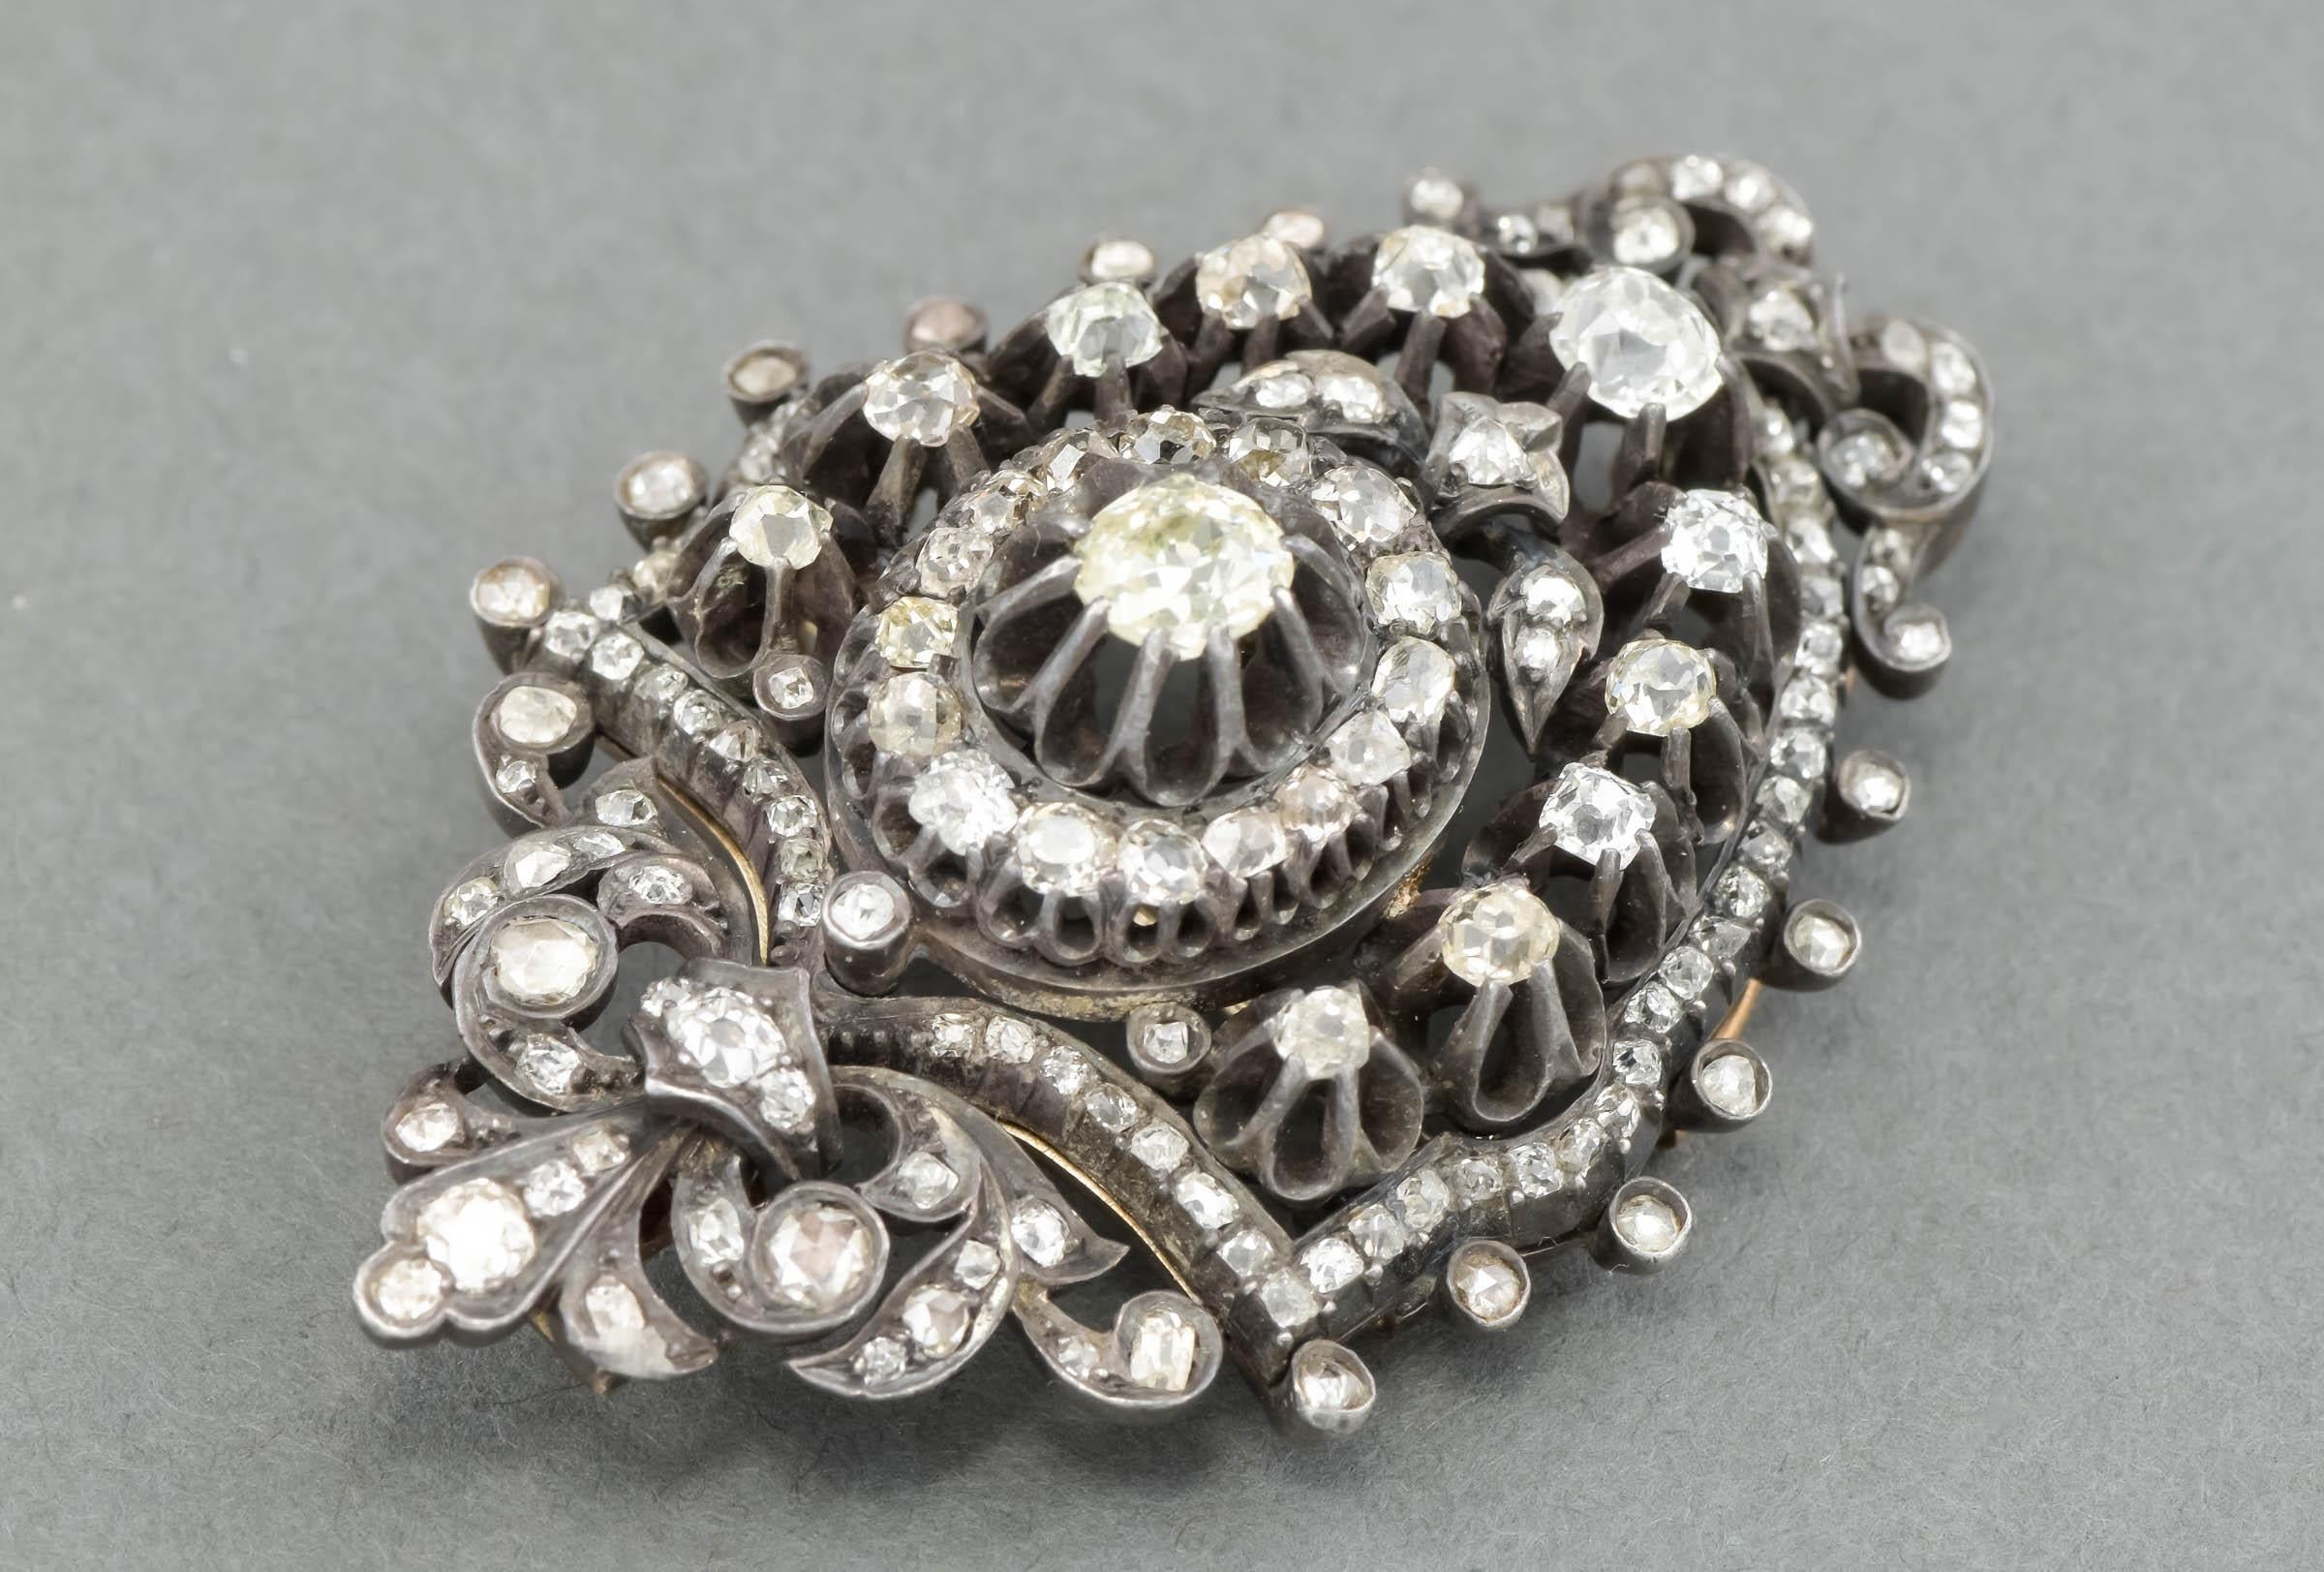 Absolutely gorgeous in person, this glittery antique diamond pendant brooch is very large and special.  I believe it was once part of a larger piece of jewelry dating to the late Georgian to early Victorian period.

Crafted of silver and gold